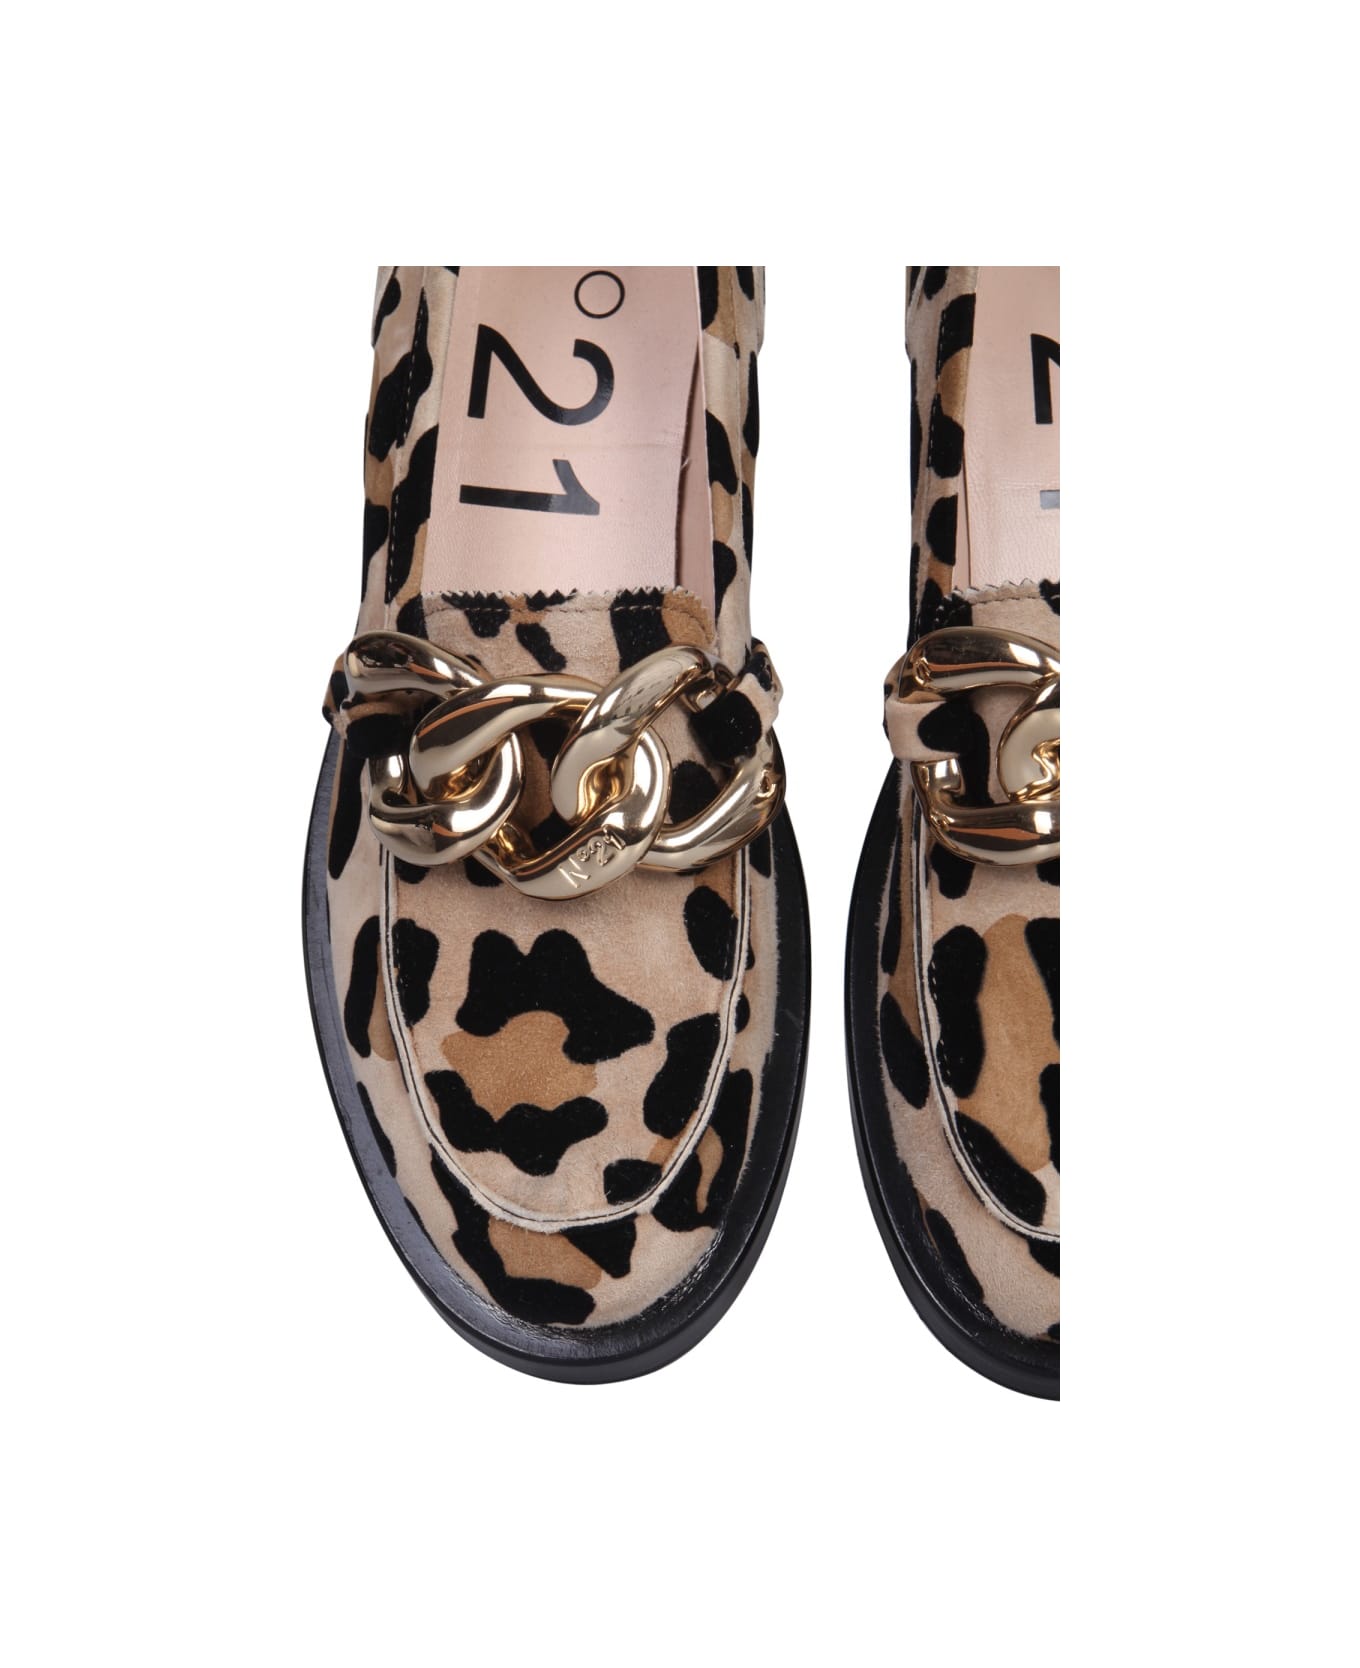 N.21 Moccasins With Oversized Chain - ANIMALIER フラットシューズ